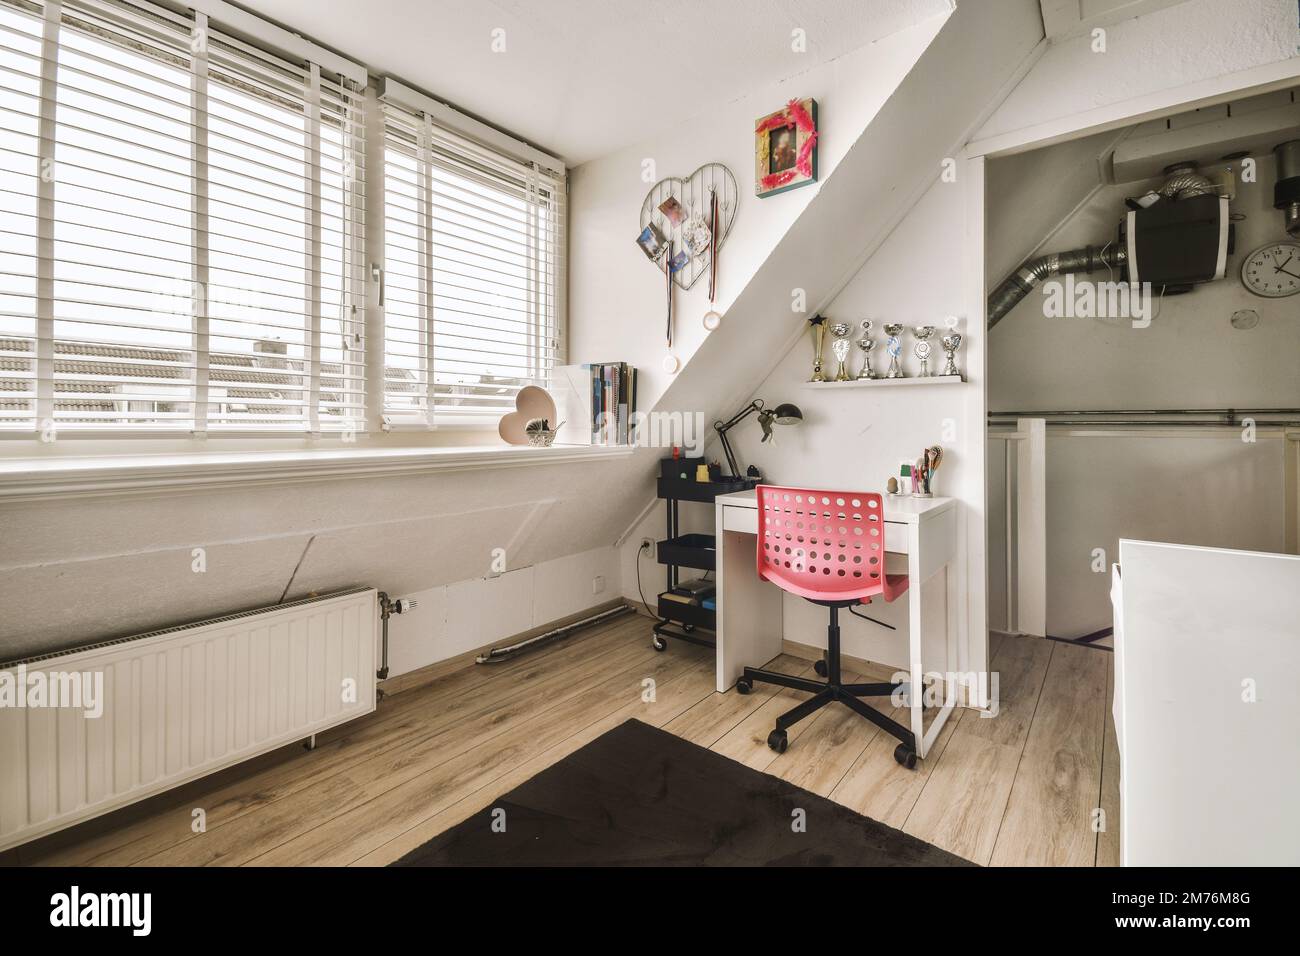 a room with wooden floors and white walls, there is a small desk in the corner next to the window Stock Photo